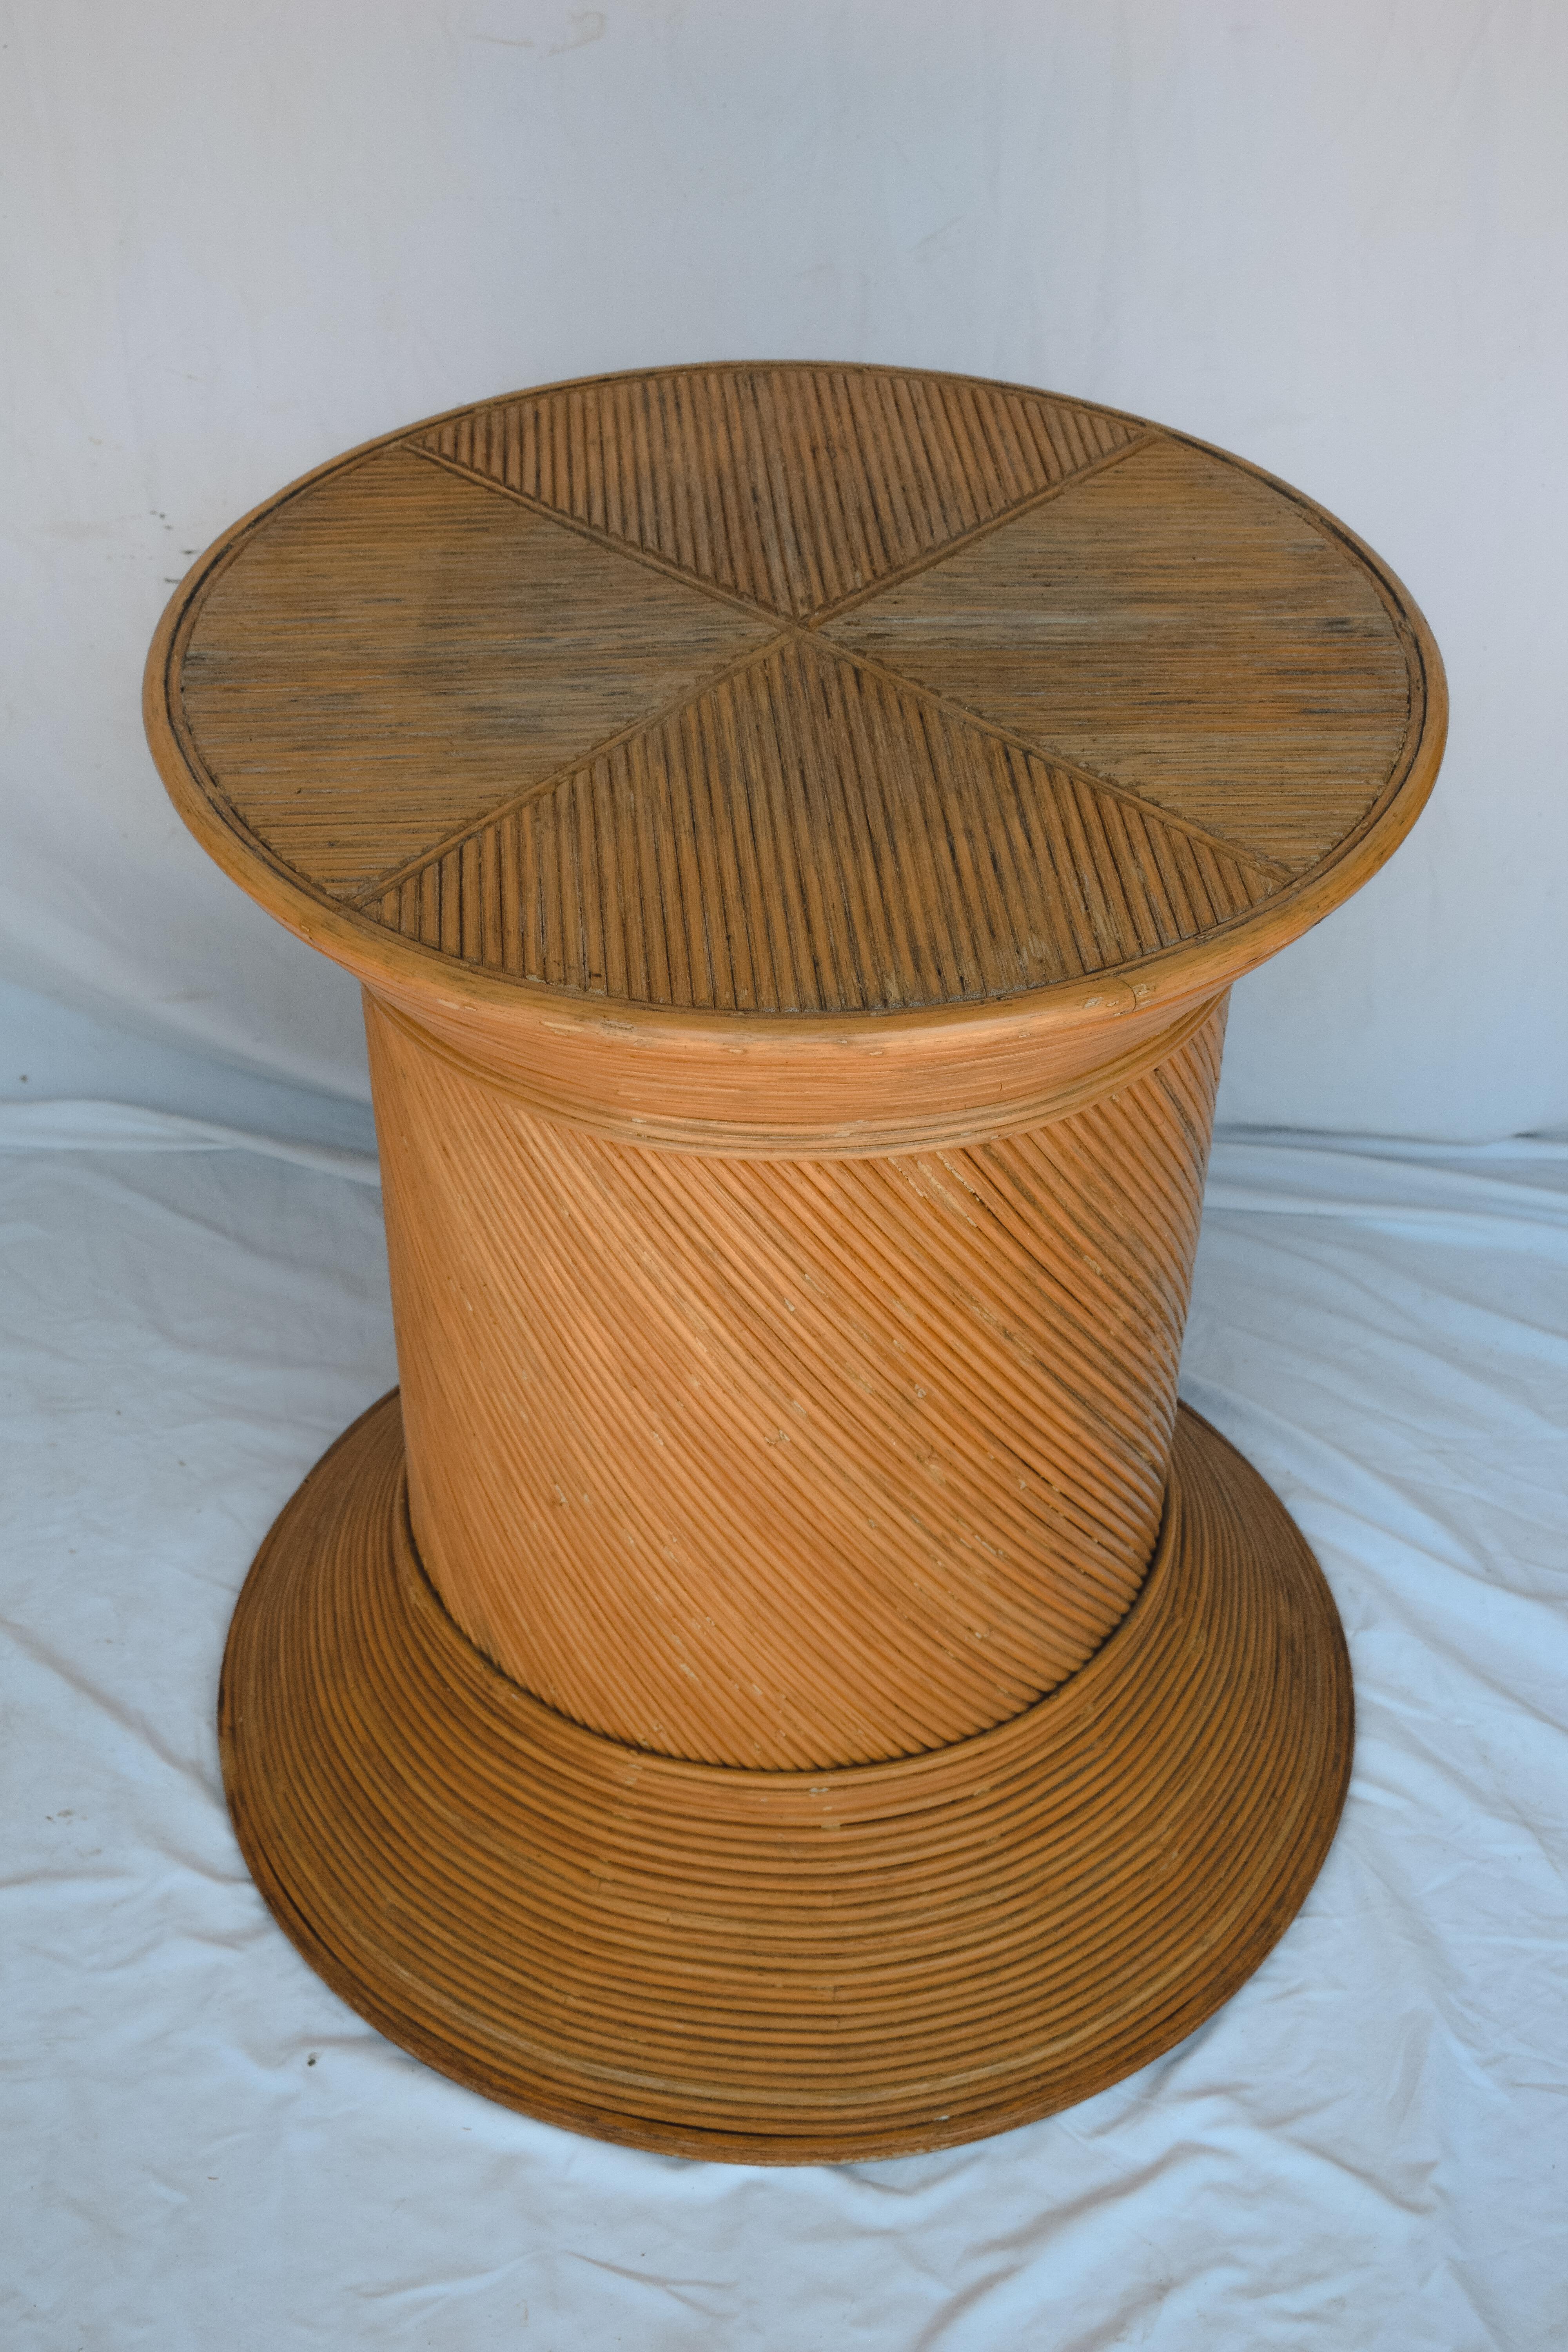 A Gorgeous Mid Century Pencil Reed Bamboo Side or Drink Table from the 1970's. 
It measures 28